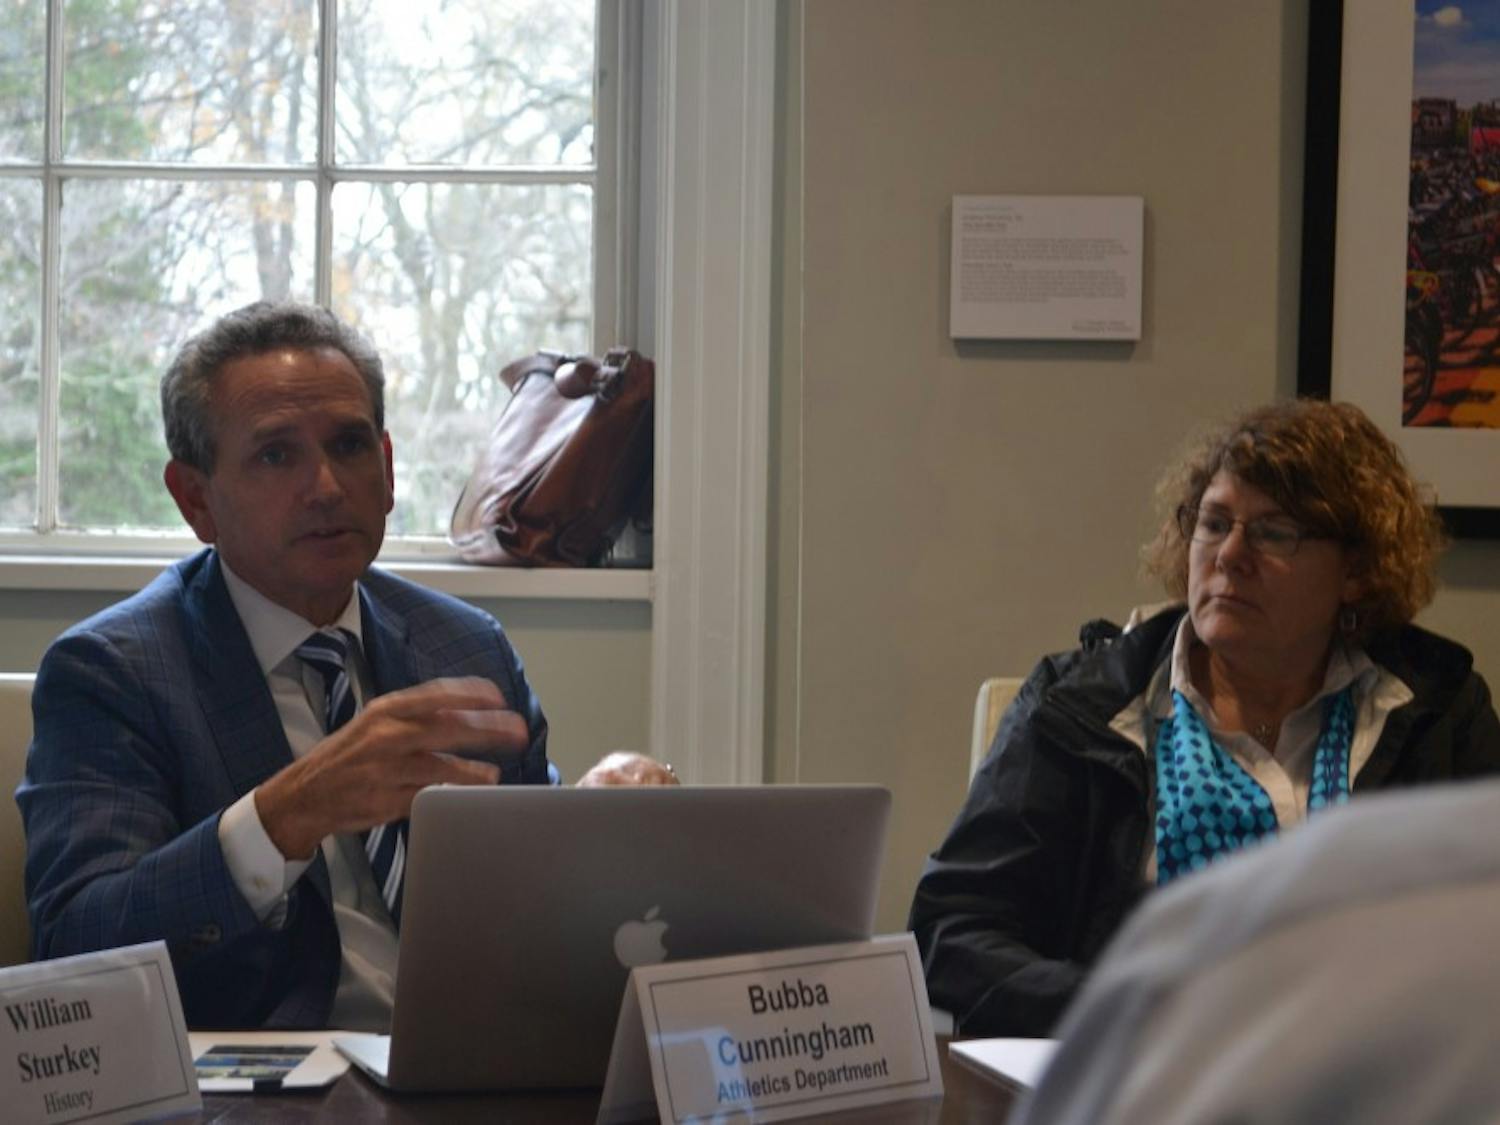 UNC Athletic Director Bubba Cunningham and Jaye Cable discuss the minutes during the Faculty Executive Committee Meeting on Tuesday, Sept. 10, 2019.&nbsp;
